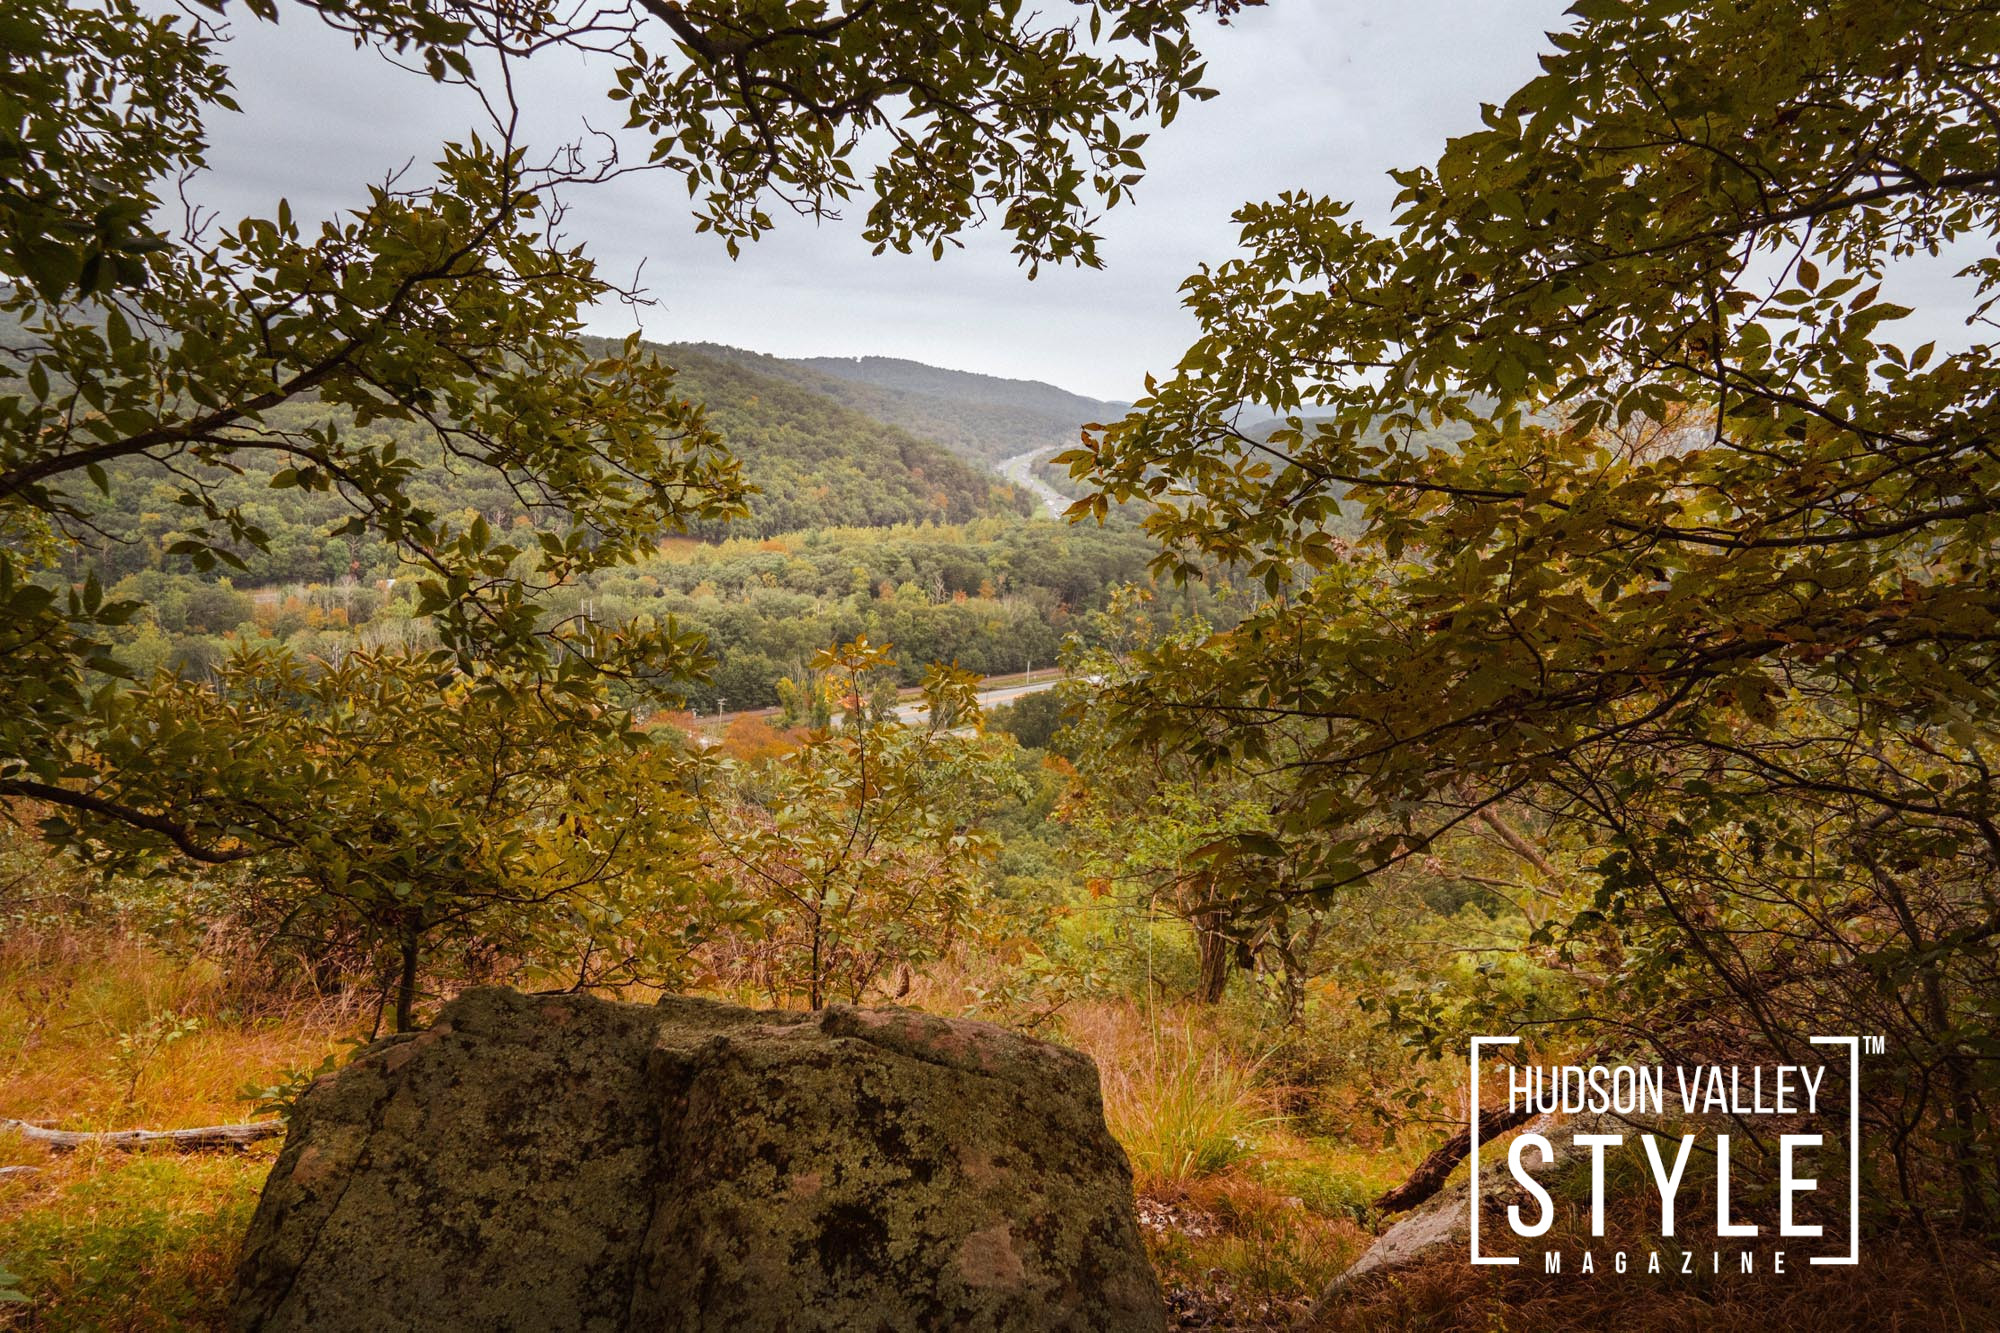 Harriman's Autumn Tapestry: A Photographer's Journey by Nature Photographer Maxwell Alexander – Harriman State Park, Tuxedo, NY – Presented by Alluvion Vacations